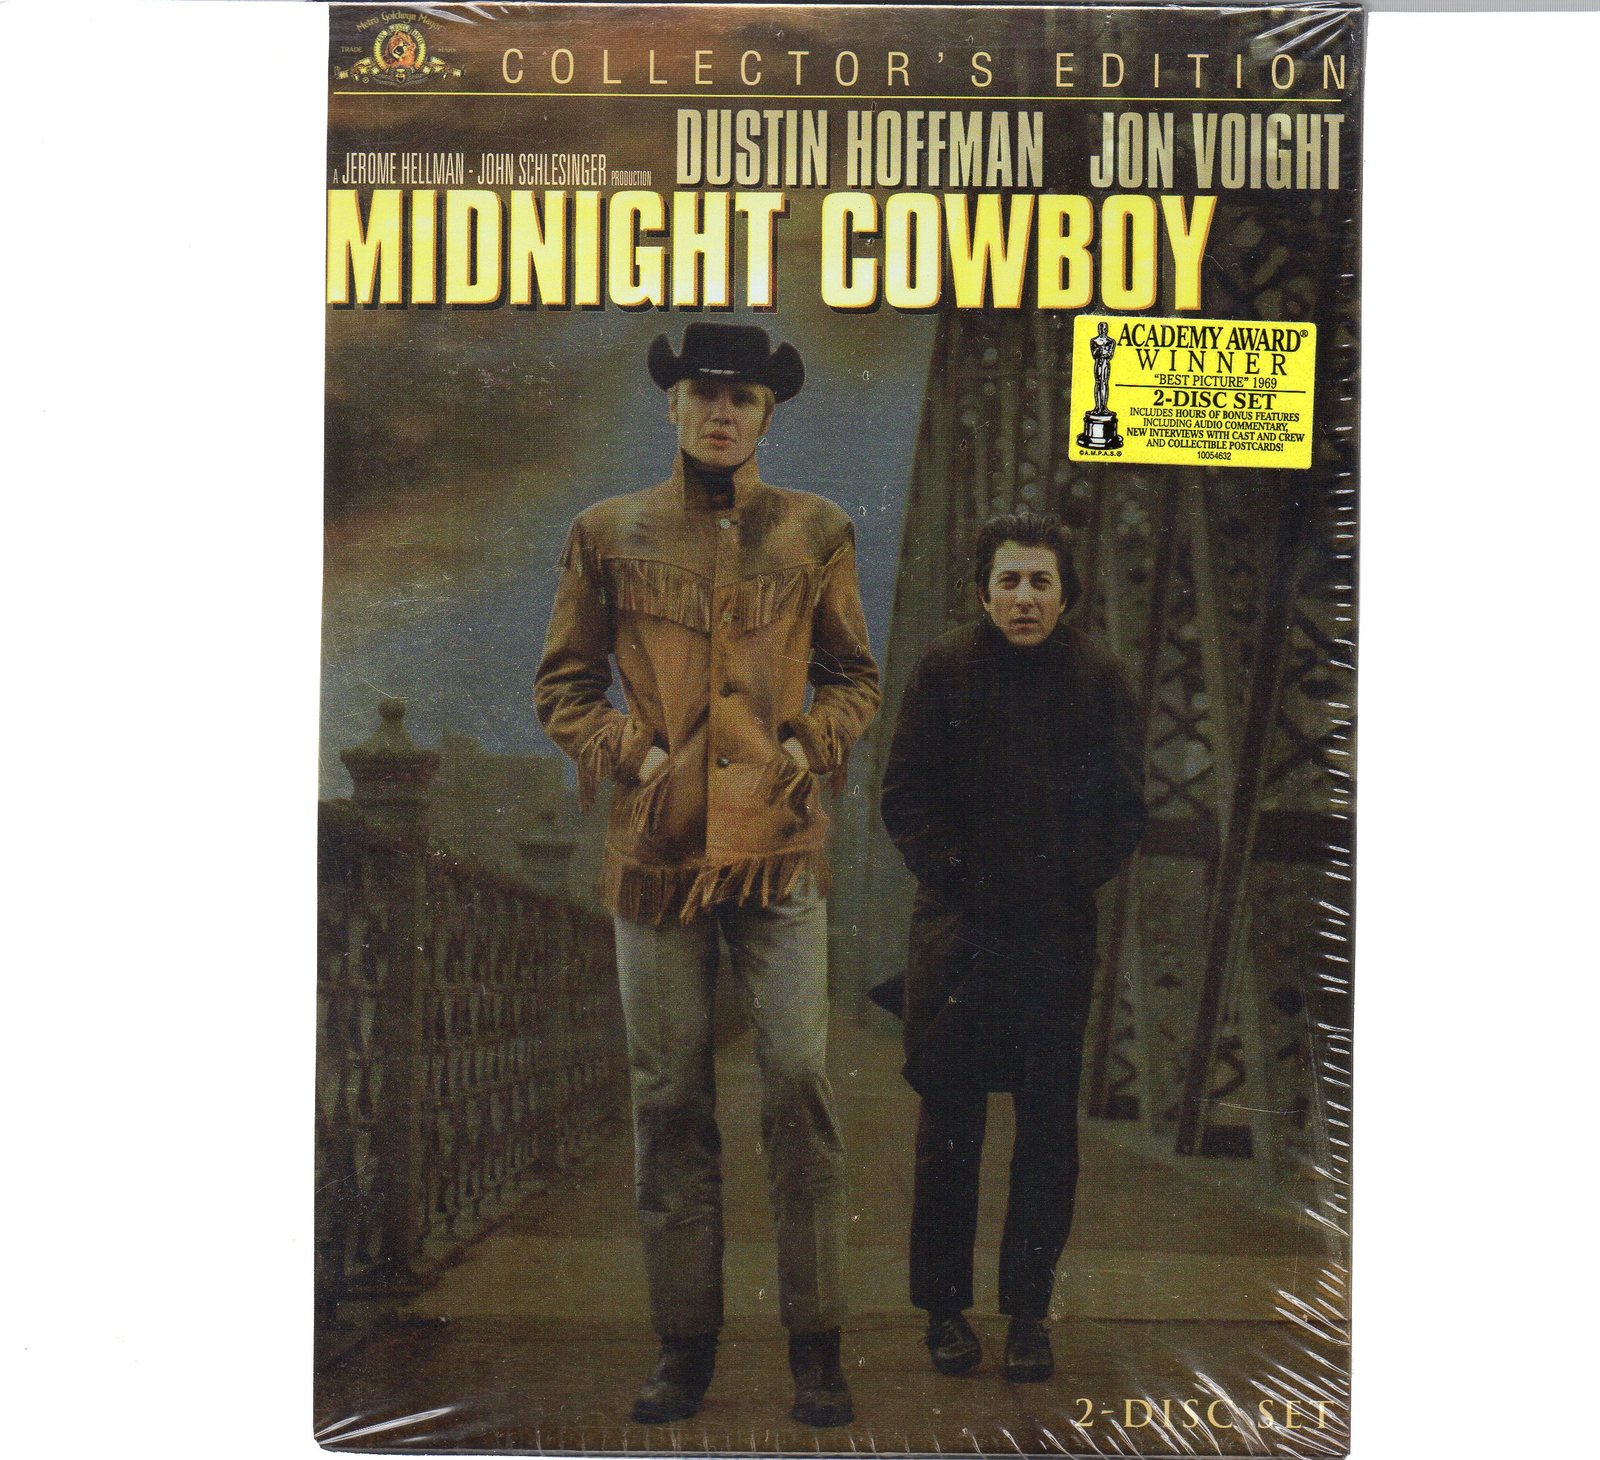 MIDNIGHT COWBOY (dvd) *NEW* 2-disc collector ed; Jon Voight, deleted version - $14.99